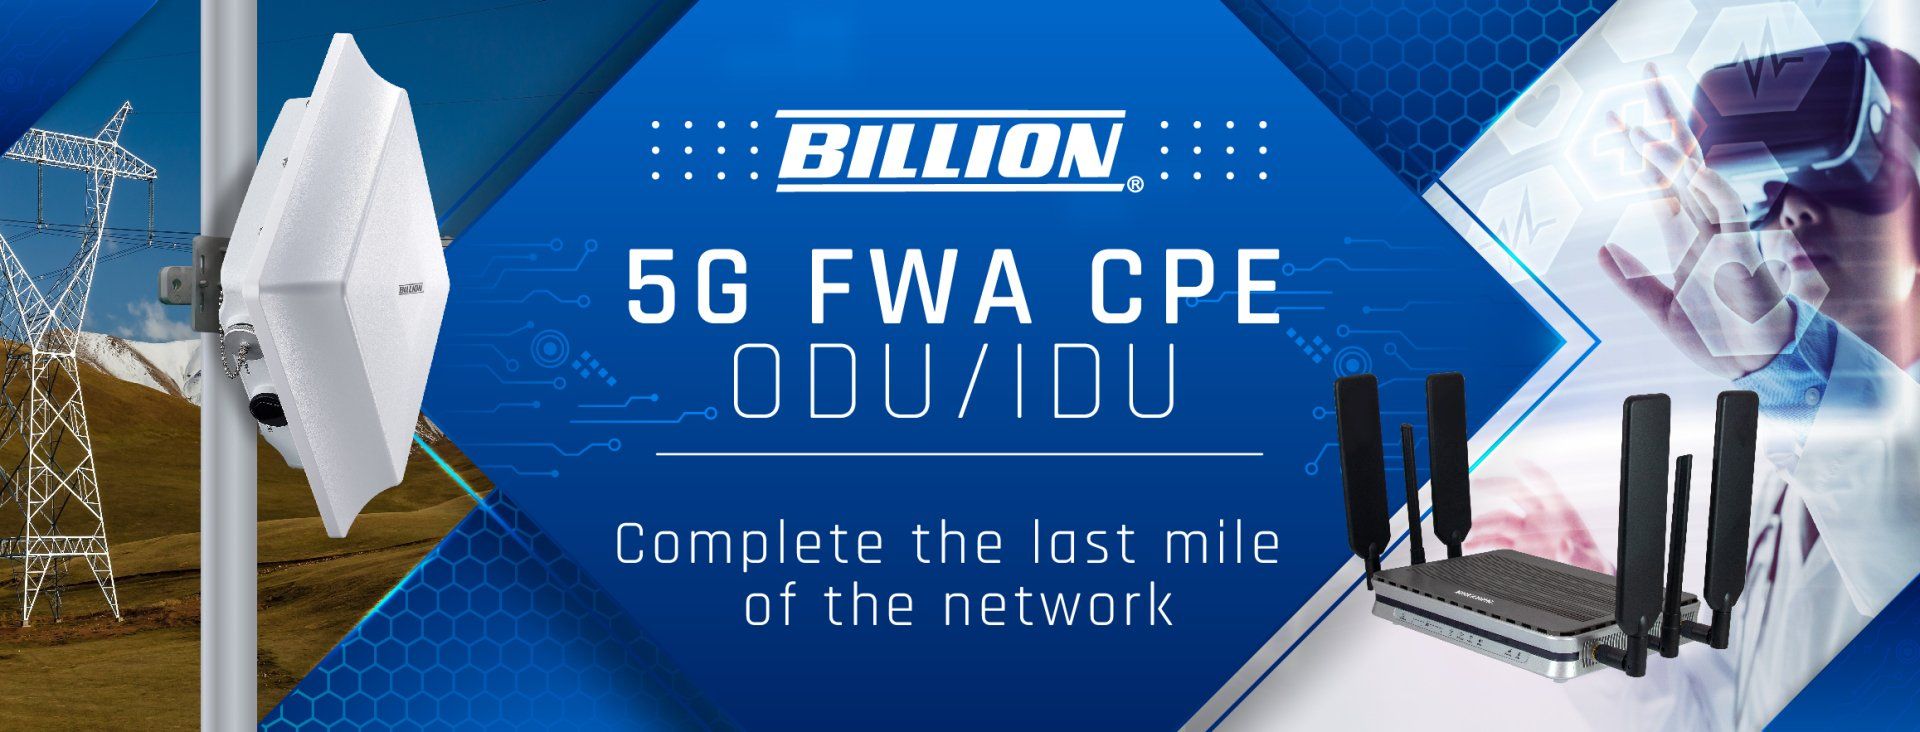 5G FWA CPE to Accelerate the Upgrading of Communication Networks